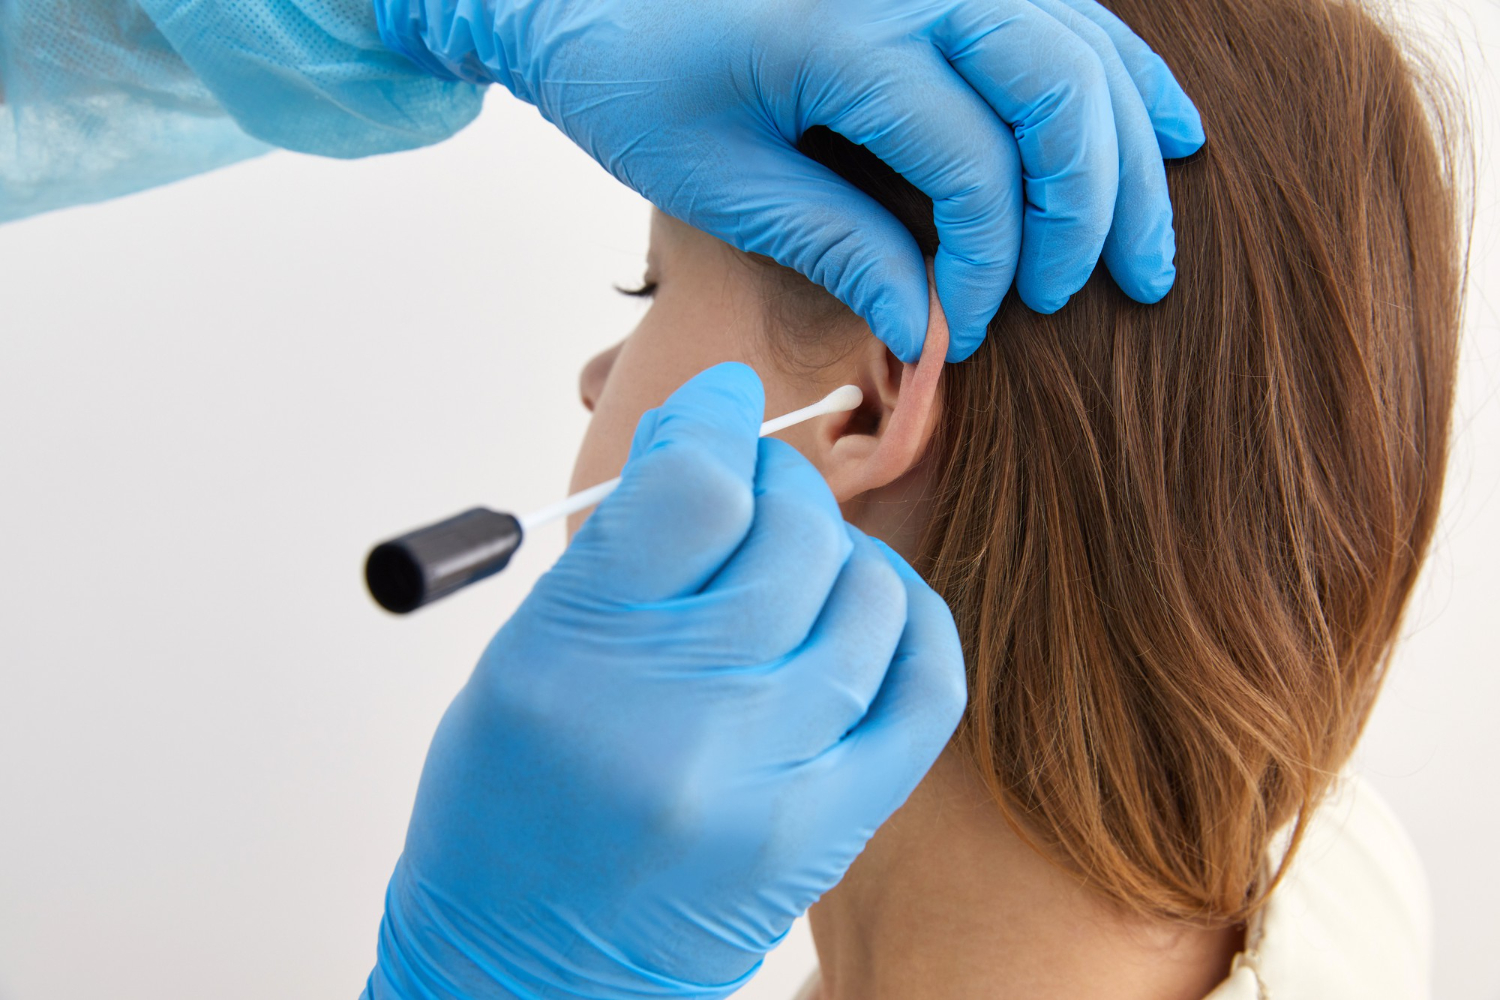 Ear Wax Removal Book an Appointment in Whetstone, Barnet for Expert Ear Care